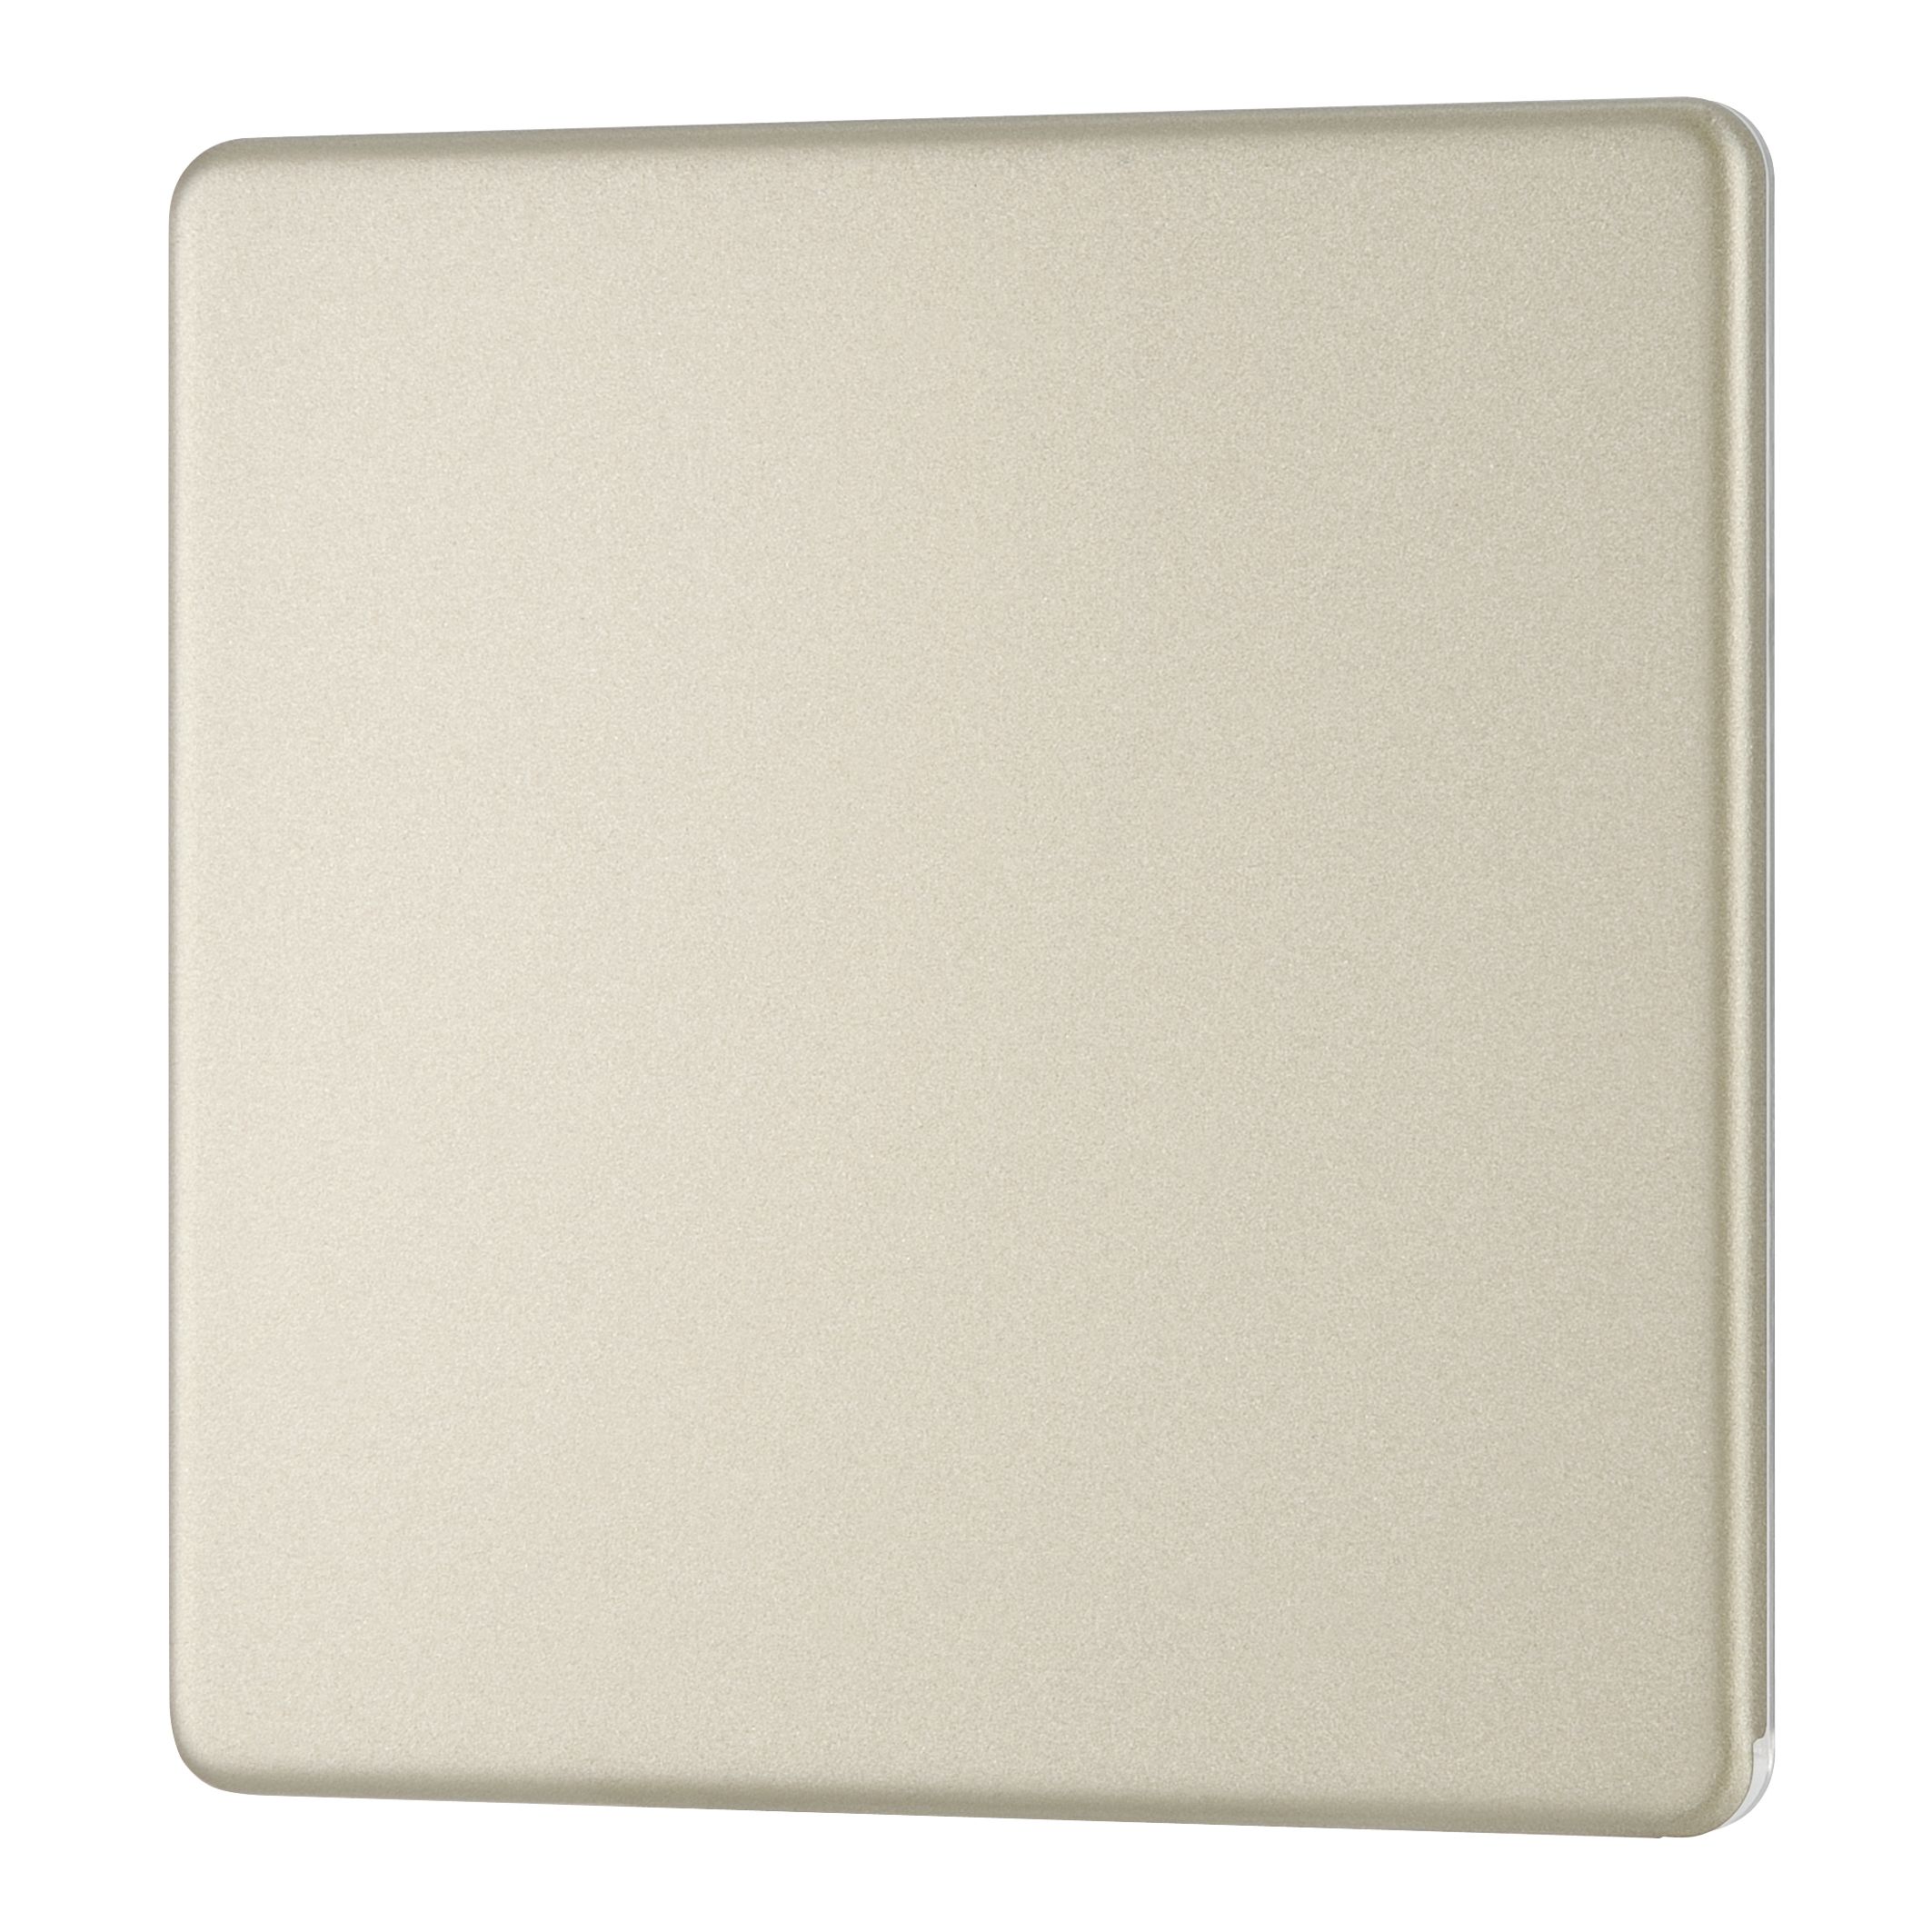 Colours Nickel Single Blanking plate